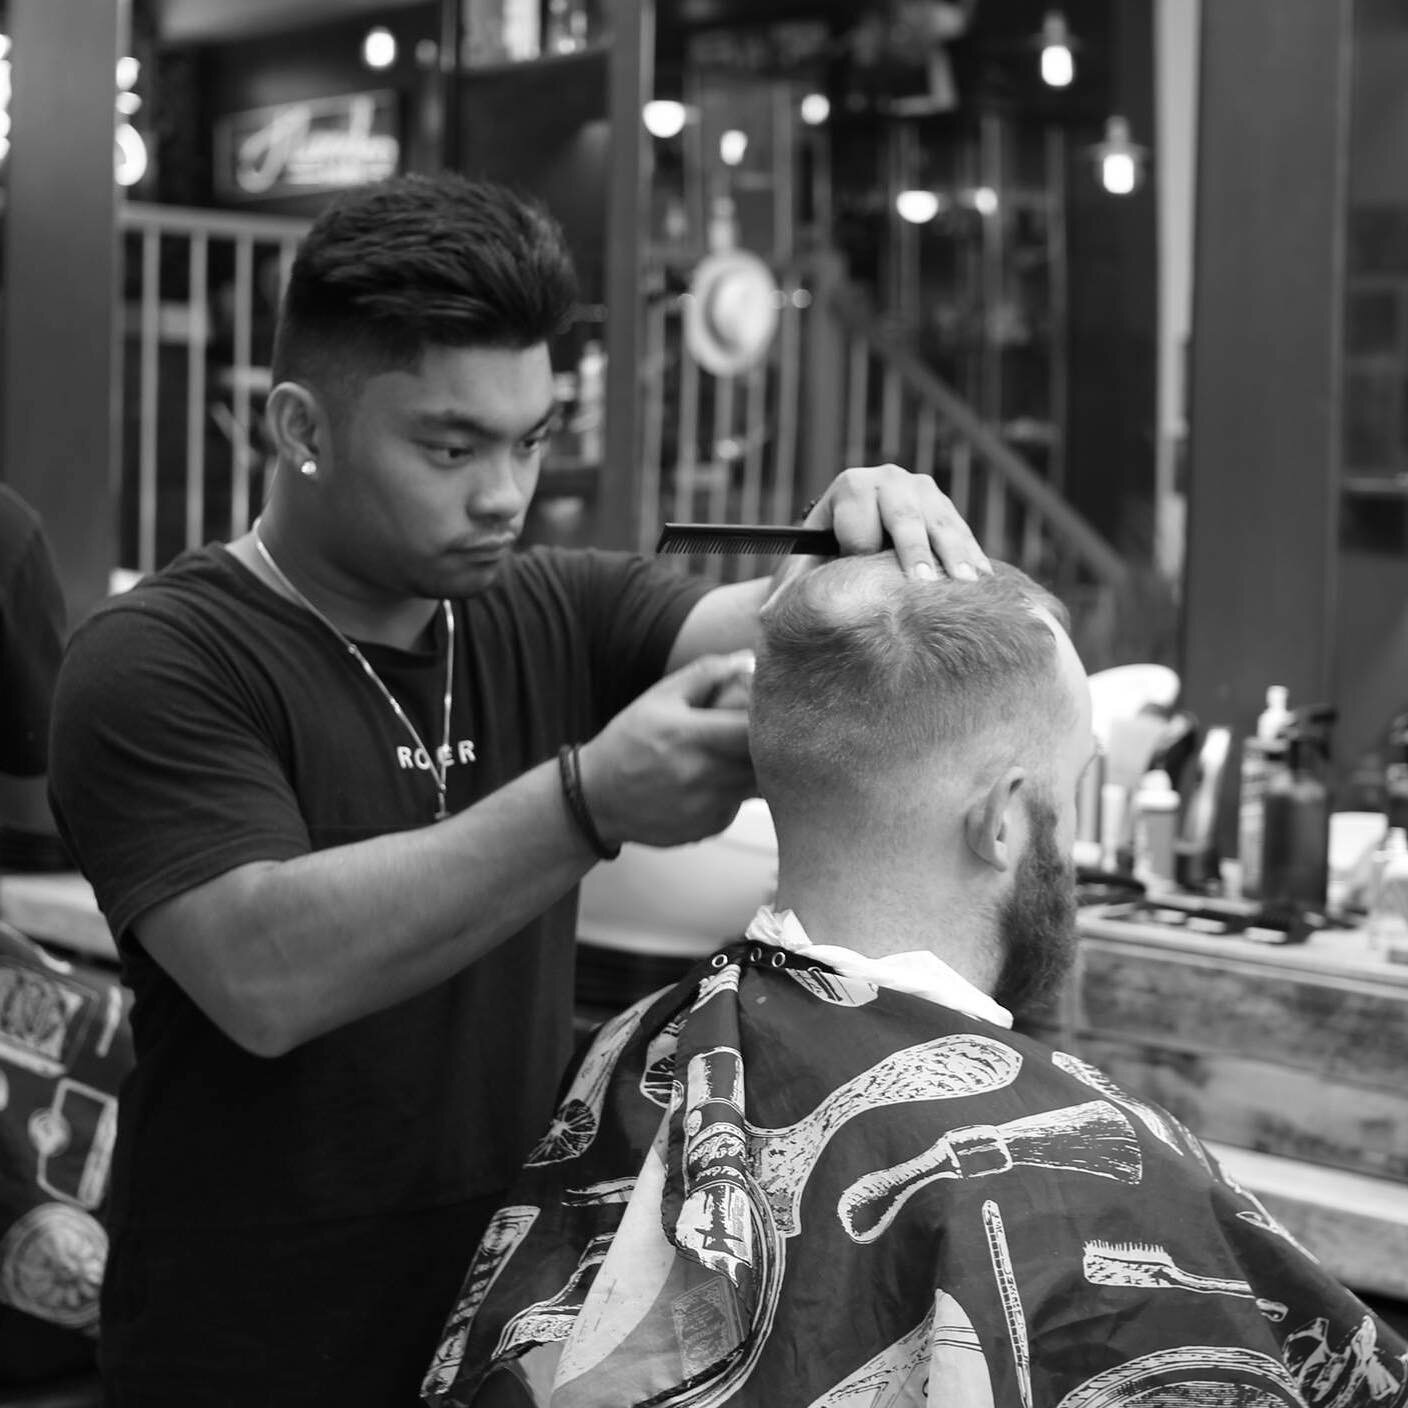 Chris &amp; Aleksina are back on the floor next week, book in via our website! If you need a cut for the weekend we have half price apprentice cuts today &amp; tomorrow 🍻💈